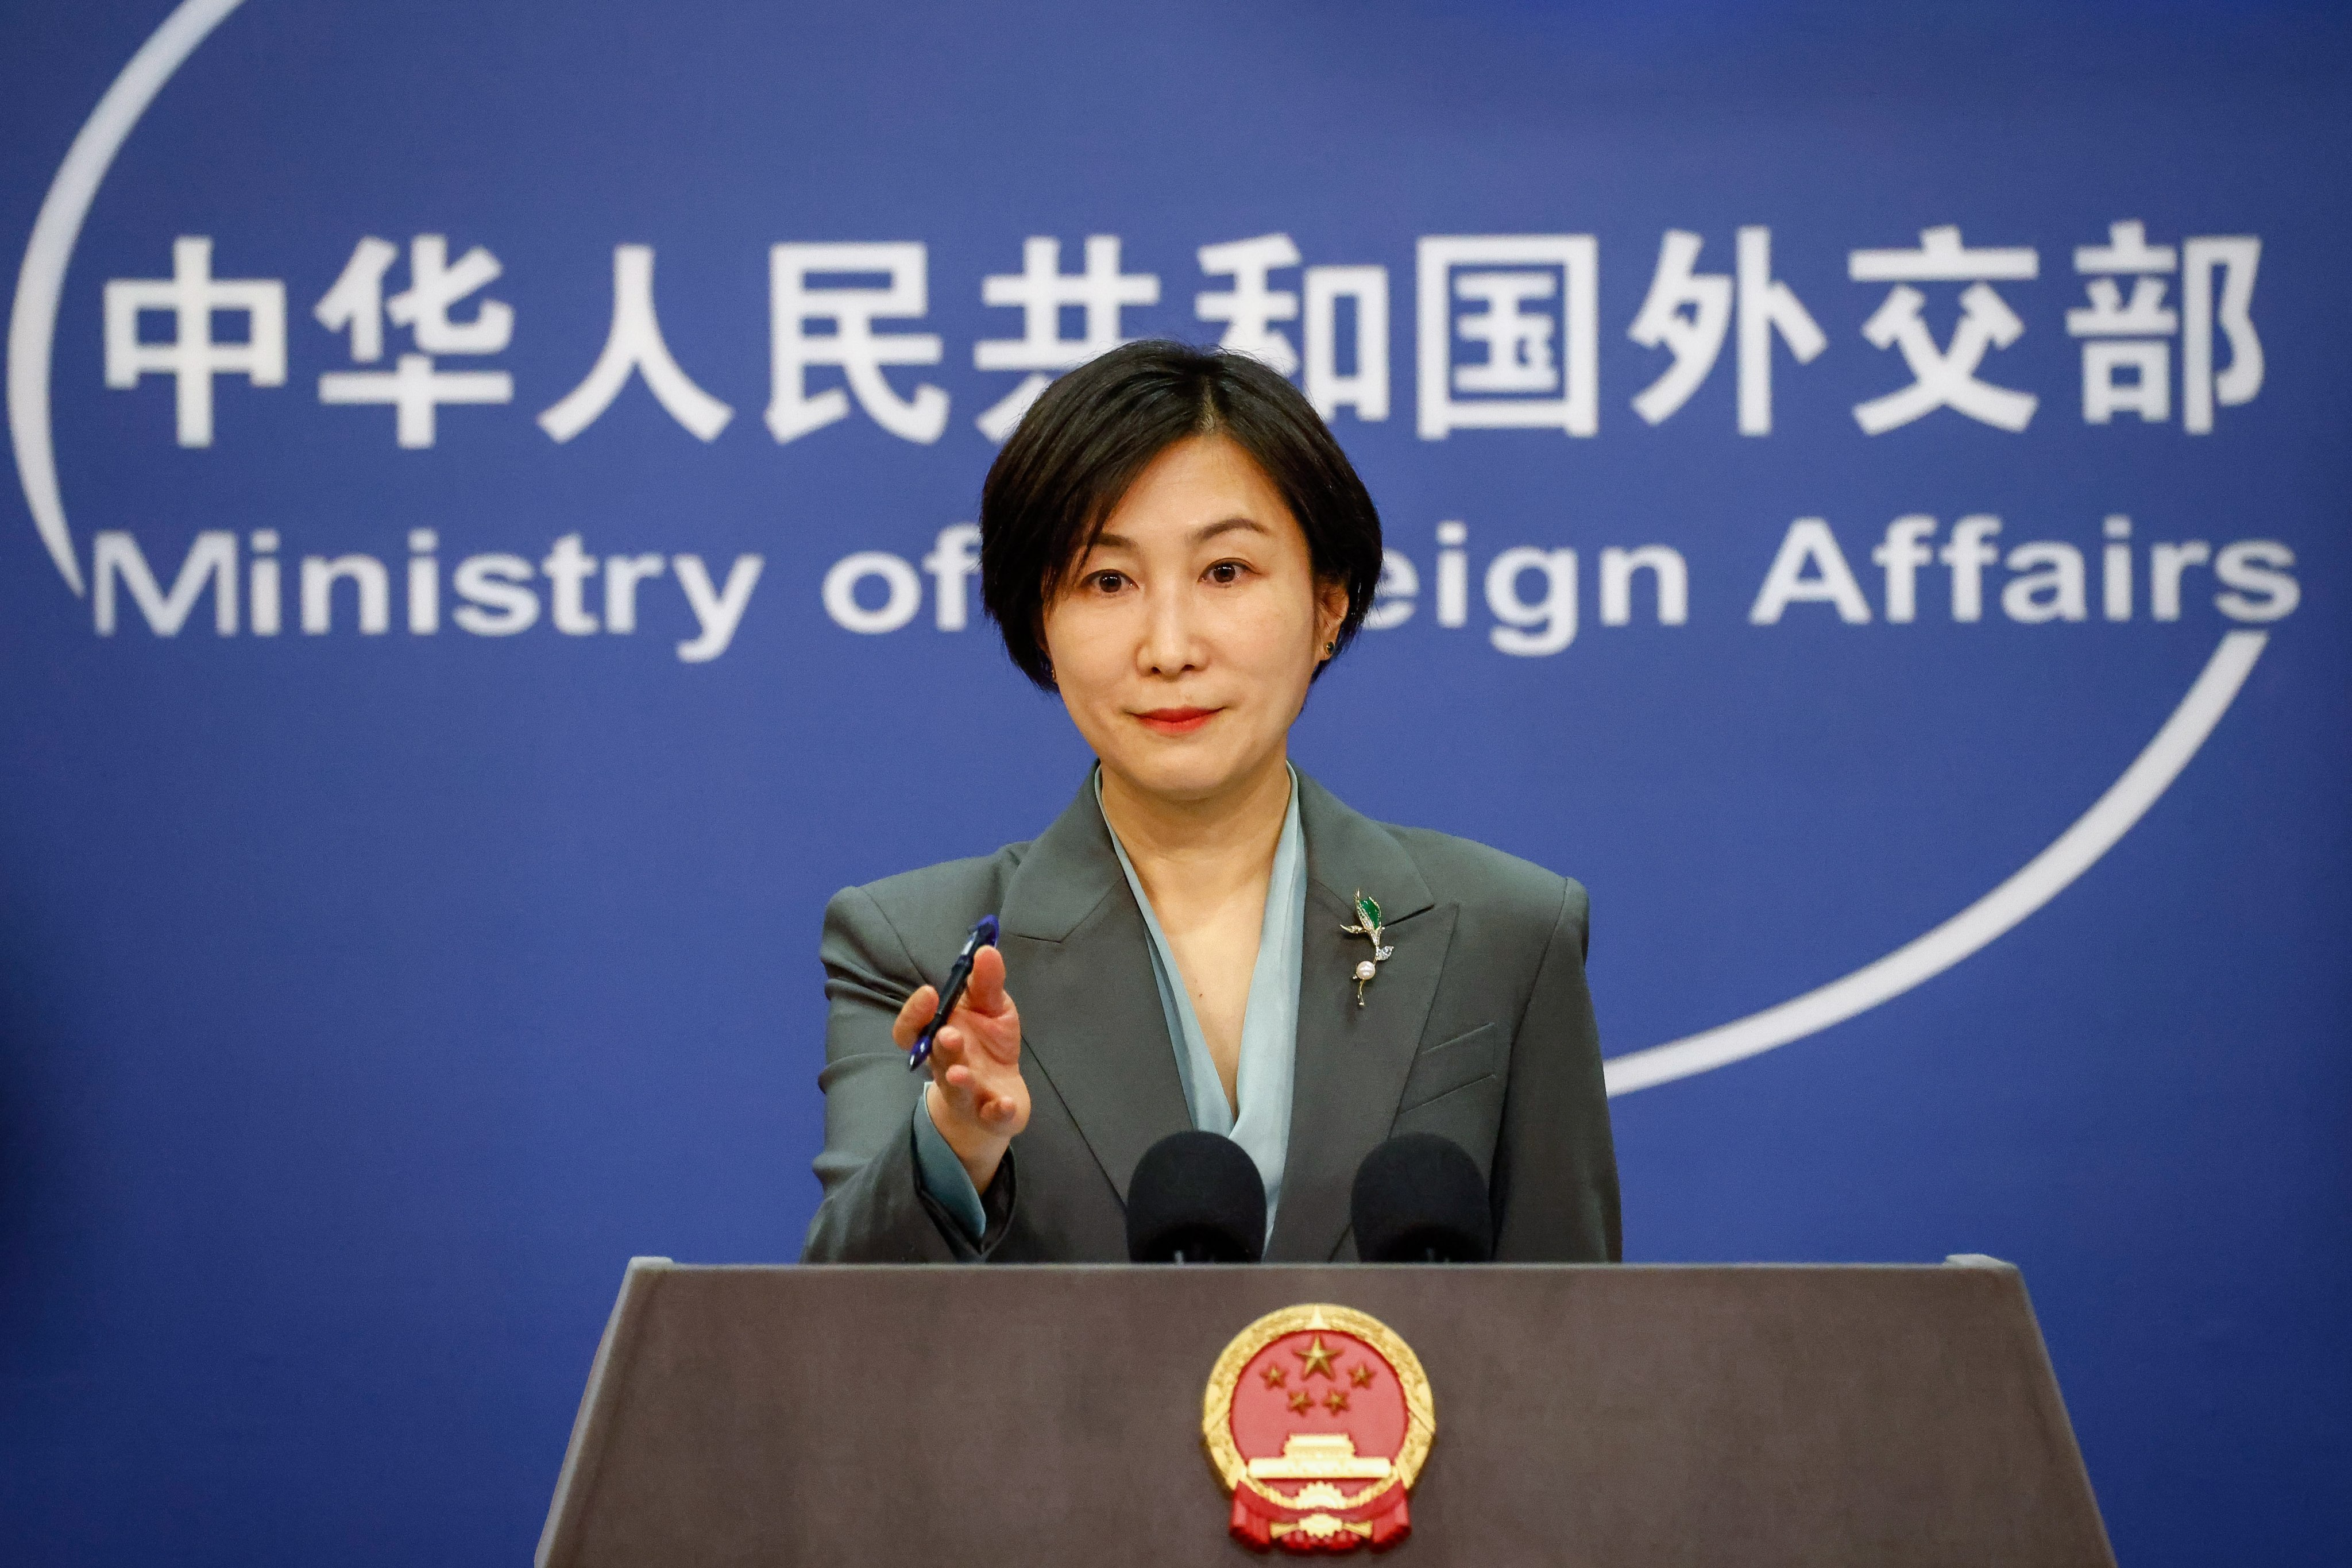 “That lab leaks are extremely unlikely is an authoritative scientific conclusion made by Chinese and WHO experts”, China’s foreign ministry spokeswoman Mao Ning has said. Photo: EPA-EFE 